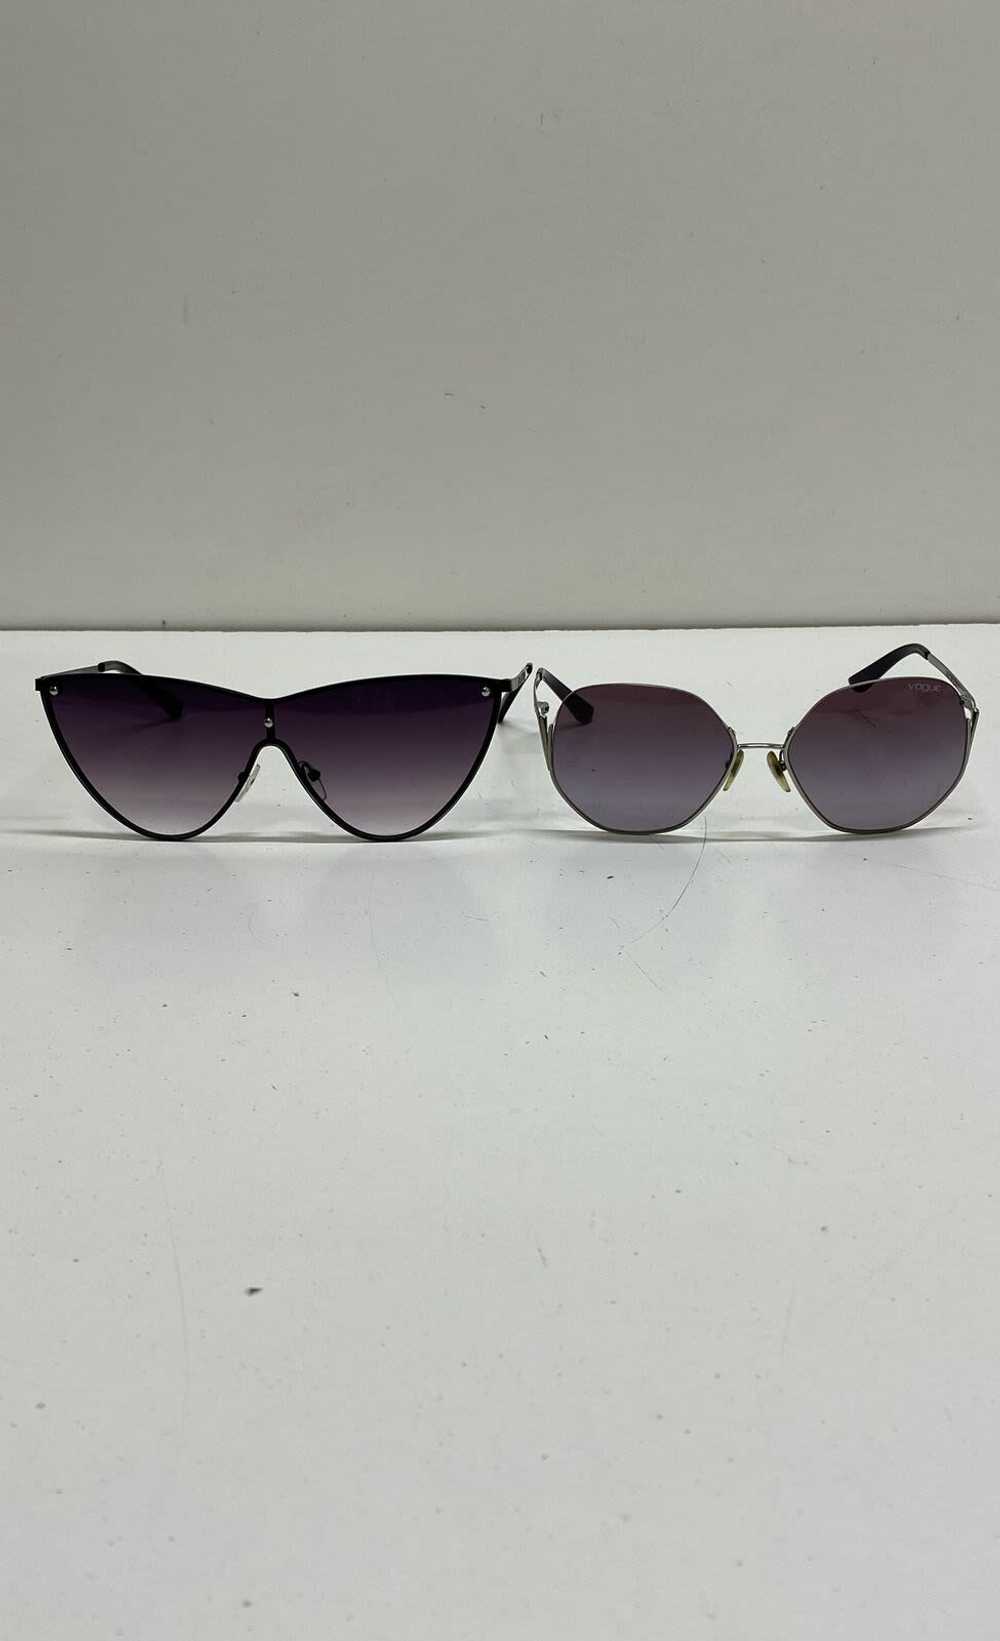 Unbranded Multicolor Sunglasses - 2 Pairs No Case - image 2